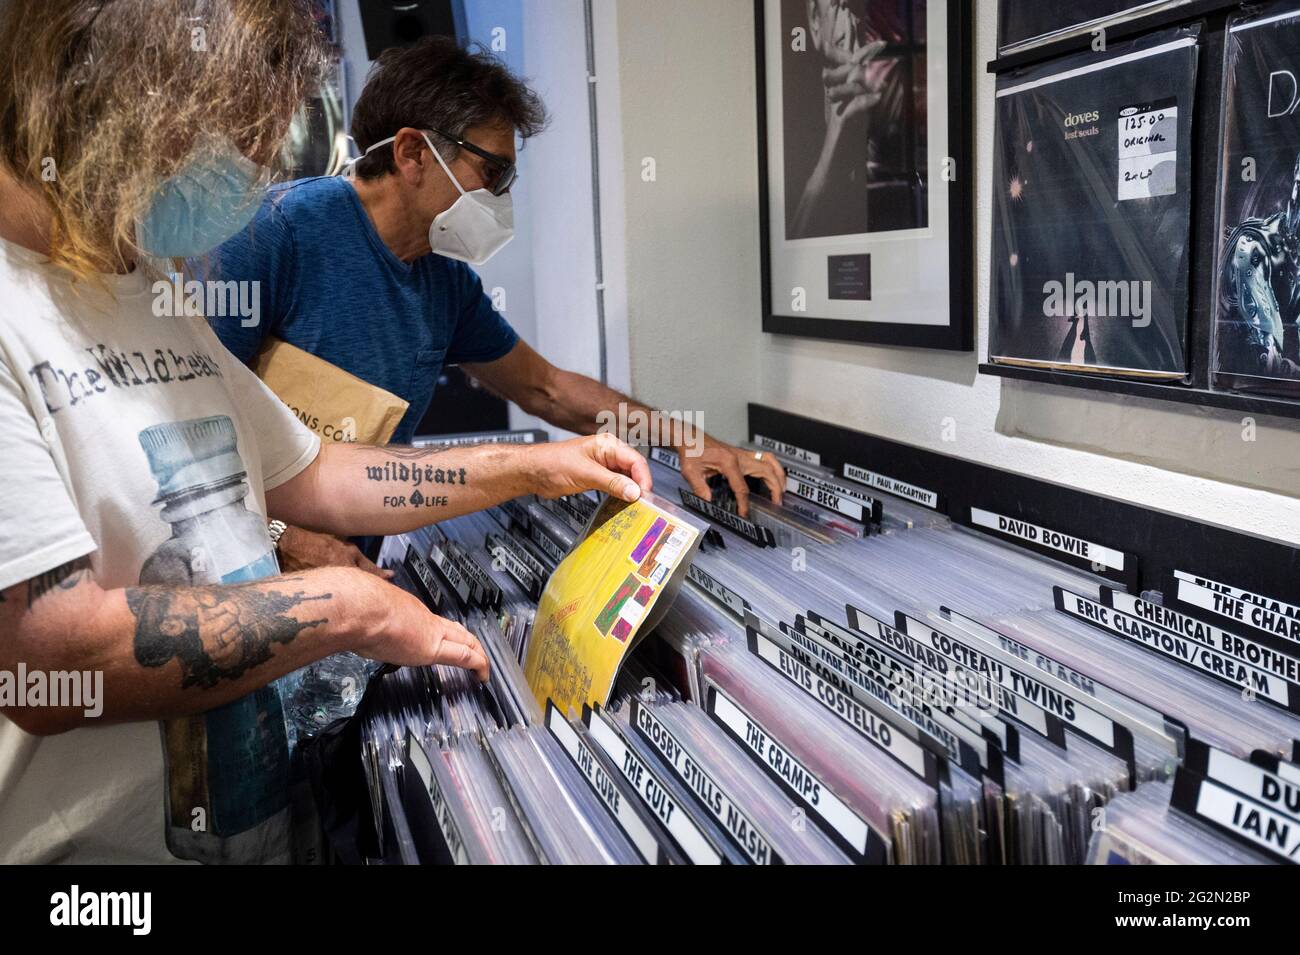 London Uk 12 June 21 Customers In Sister Ray Records In Soho On Record Store Day Where Independent Record Shops Worldwide Celebrate Music Including Special Vinyl Releases Made Exclusively For The Day